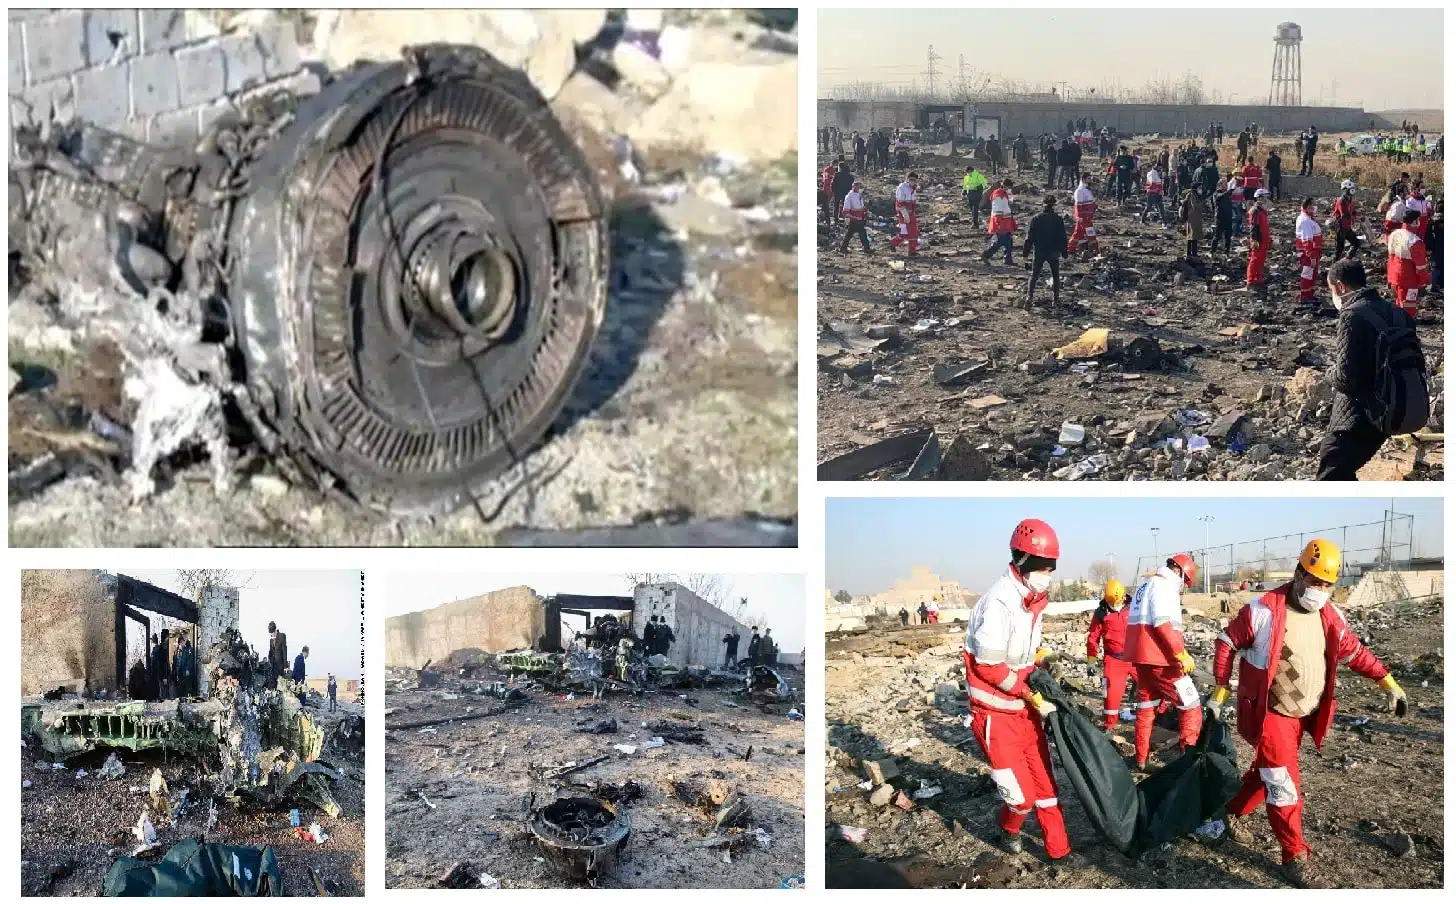 Ukrainian Boeing plane crashes in Iran shortly after takeoff, killing 176 on board